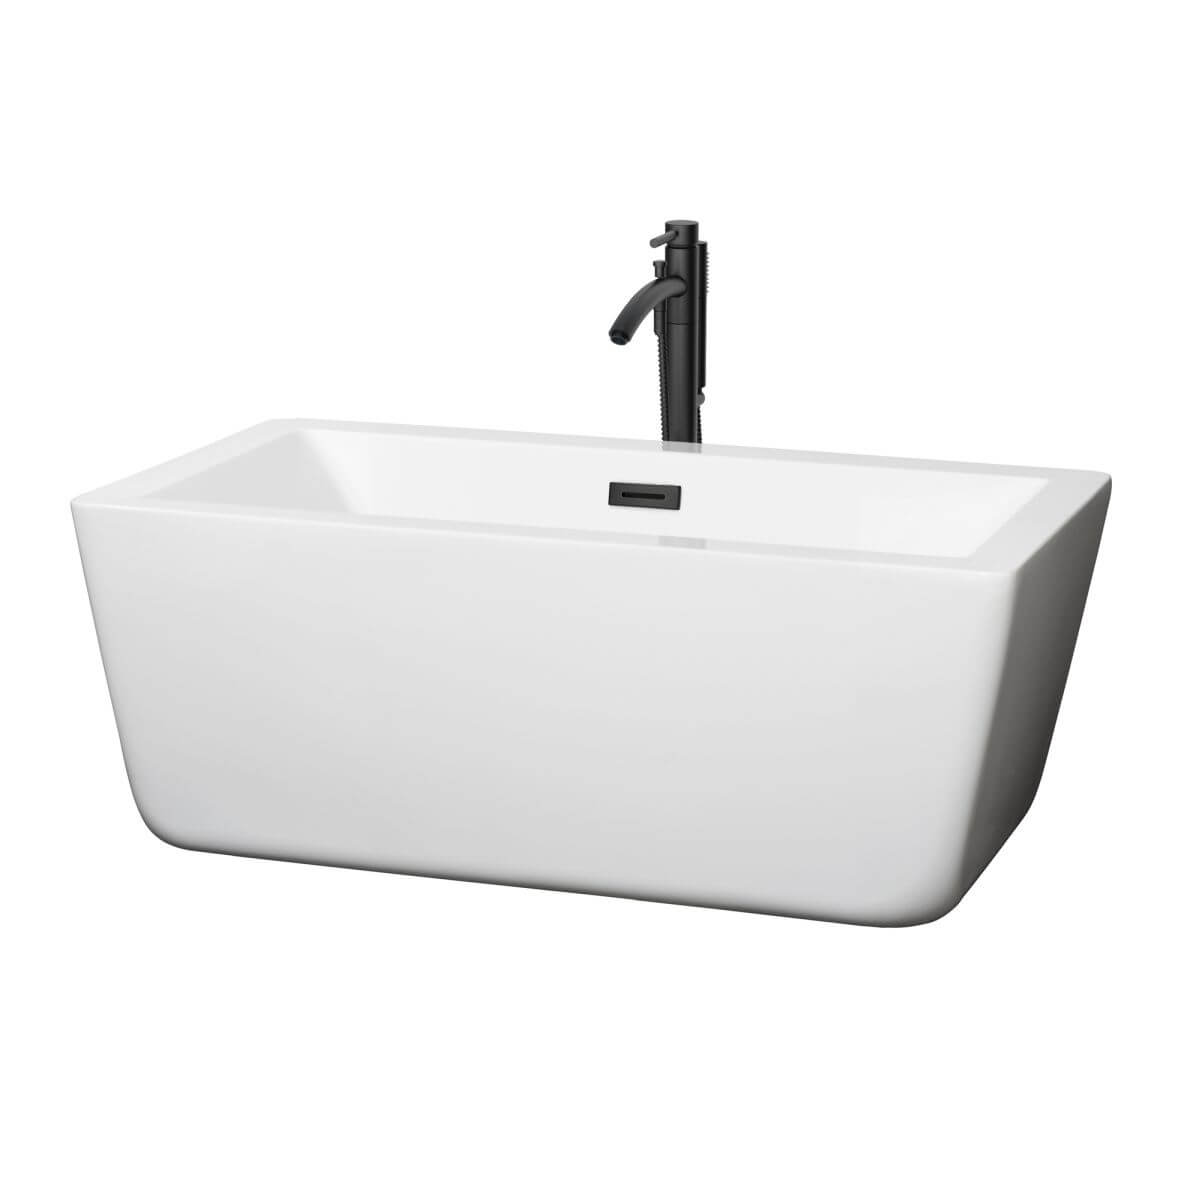 Wyndham Collection Laura 59 inch Freestanding Bathtub in White with Floor Mounted Faucet, Drain and Overflow Trim in Matte Black - WCOBT100559MBATPBK